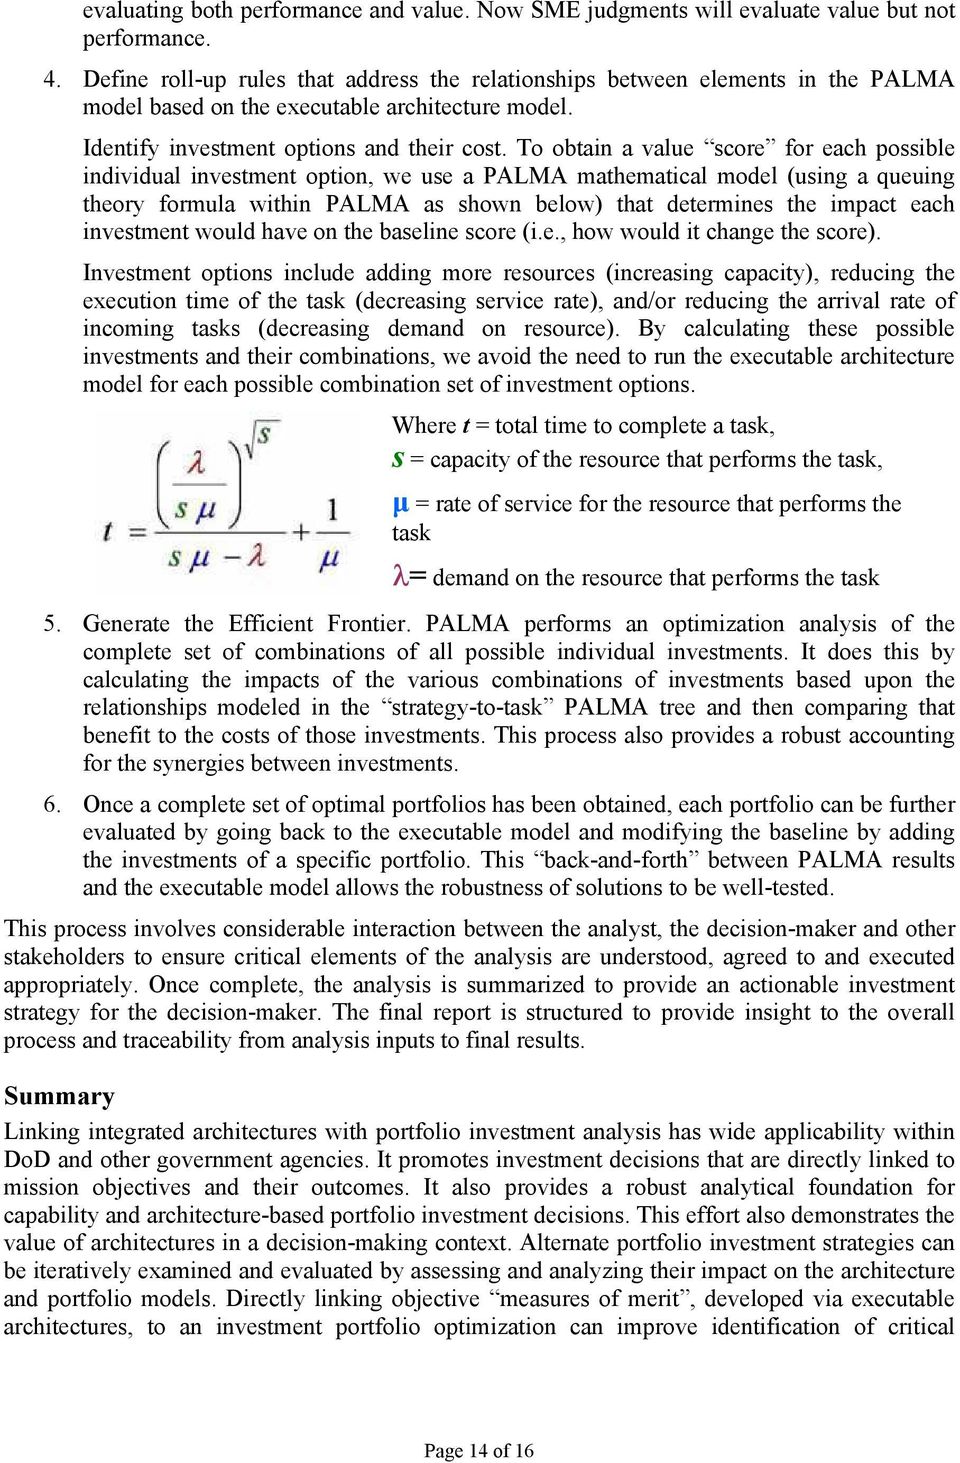 To obtain a value score for each possible individual investment option, we use a PALMA mathematical model (using a queuing theory formula within PALMA as shown below) that determines the impact each